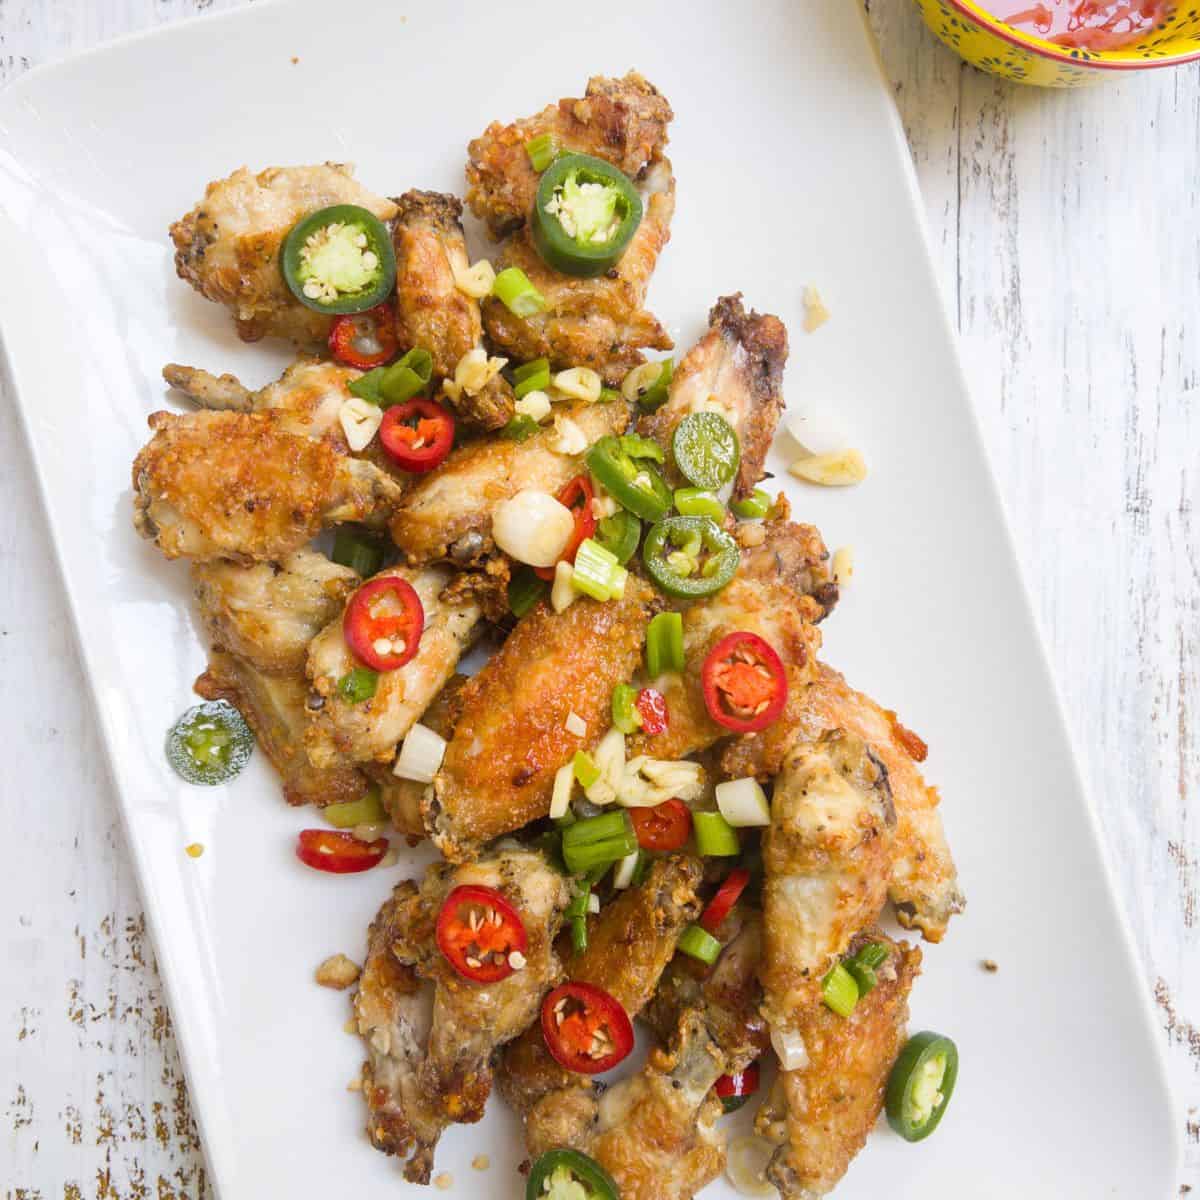 salt and pepper chicken wings garnished with chilli and spring onion on a white serving plate